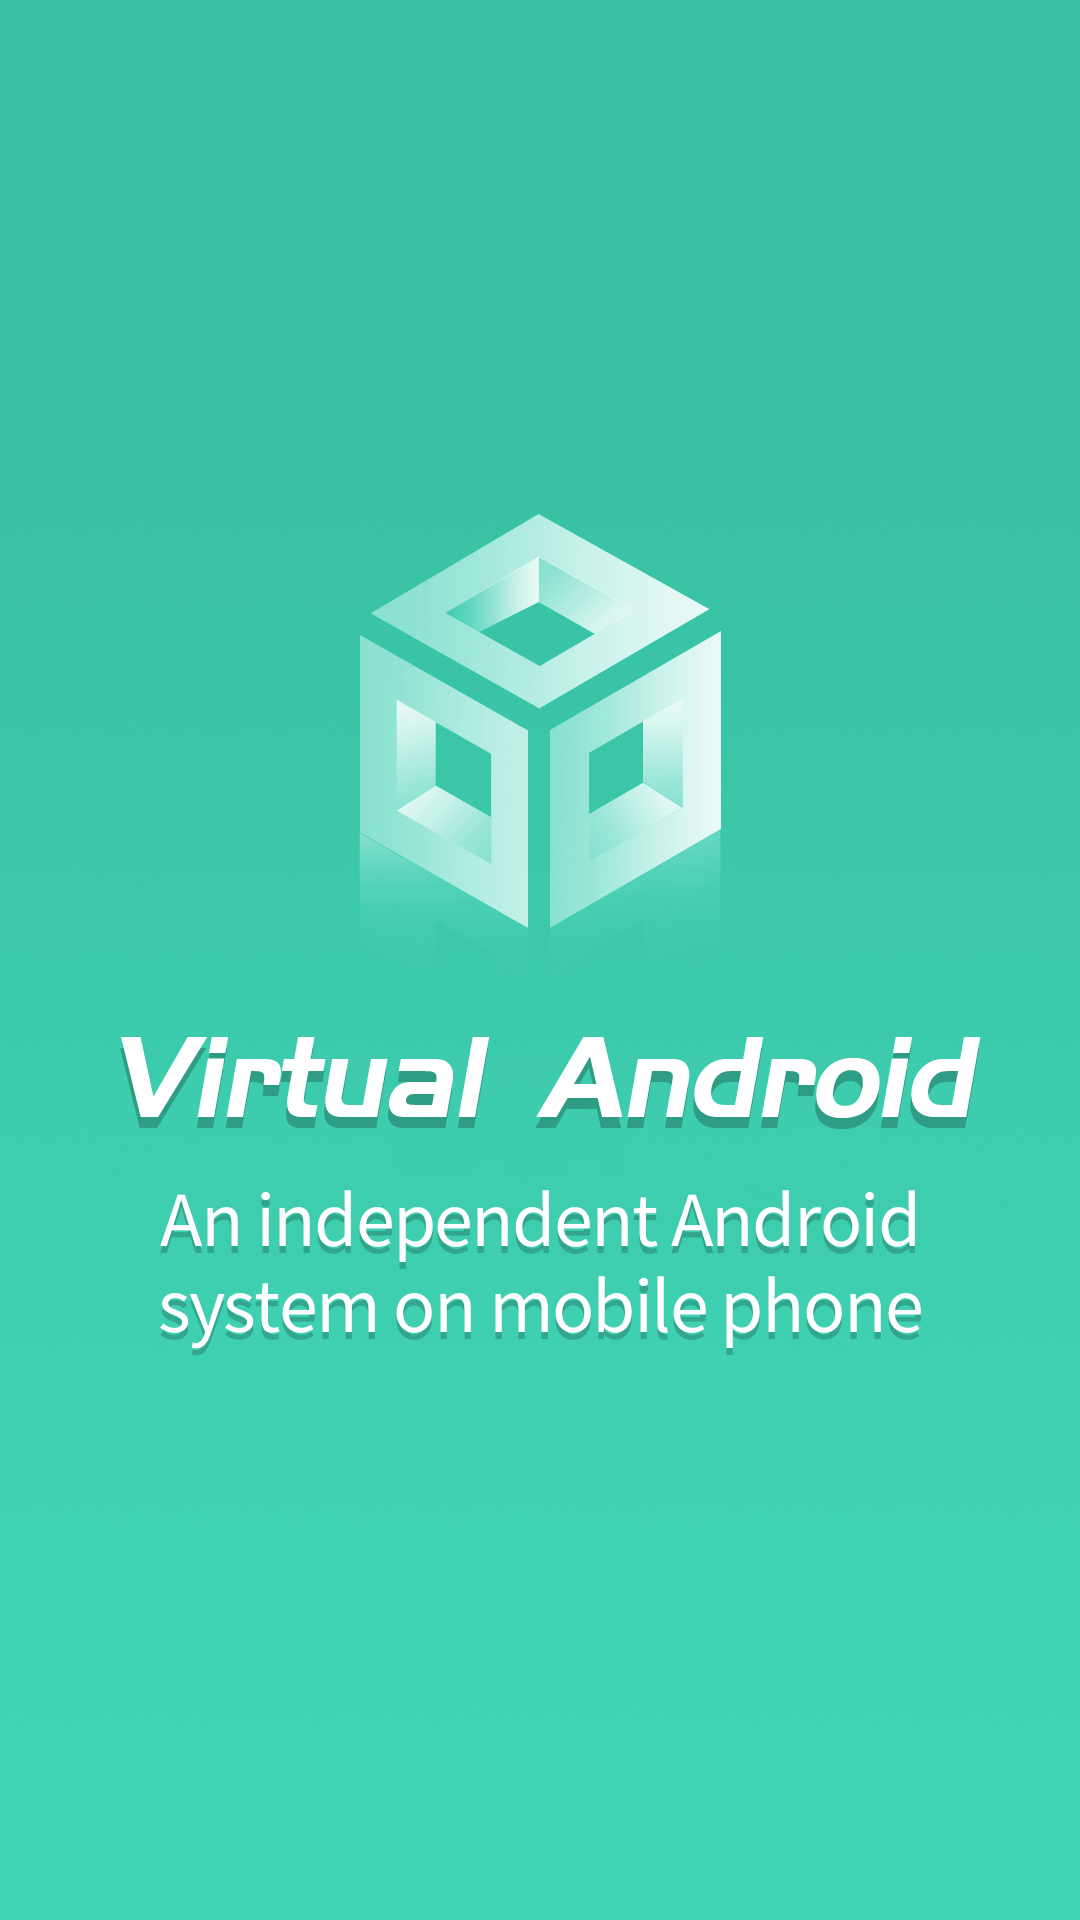 Download and install the Virtual Android app